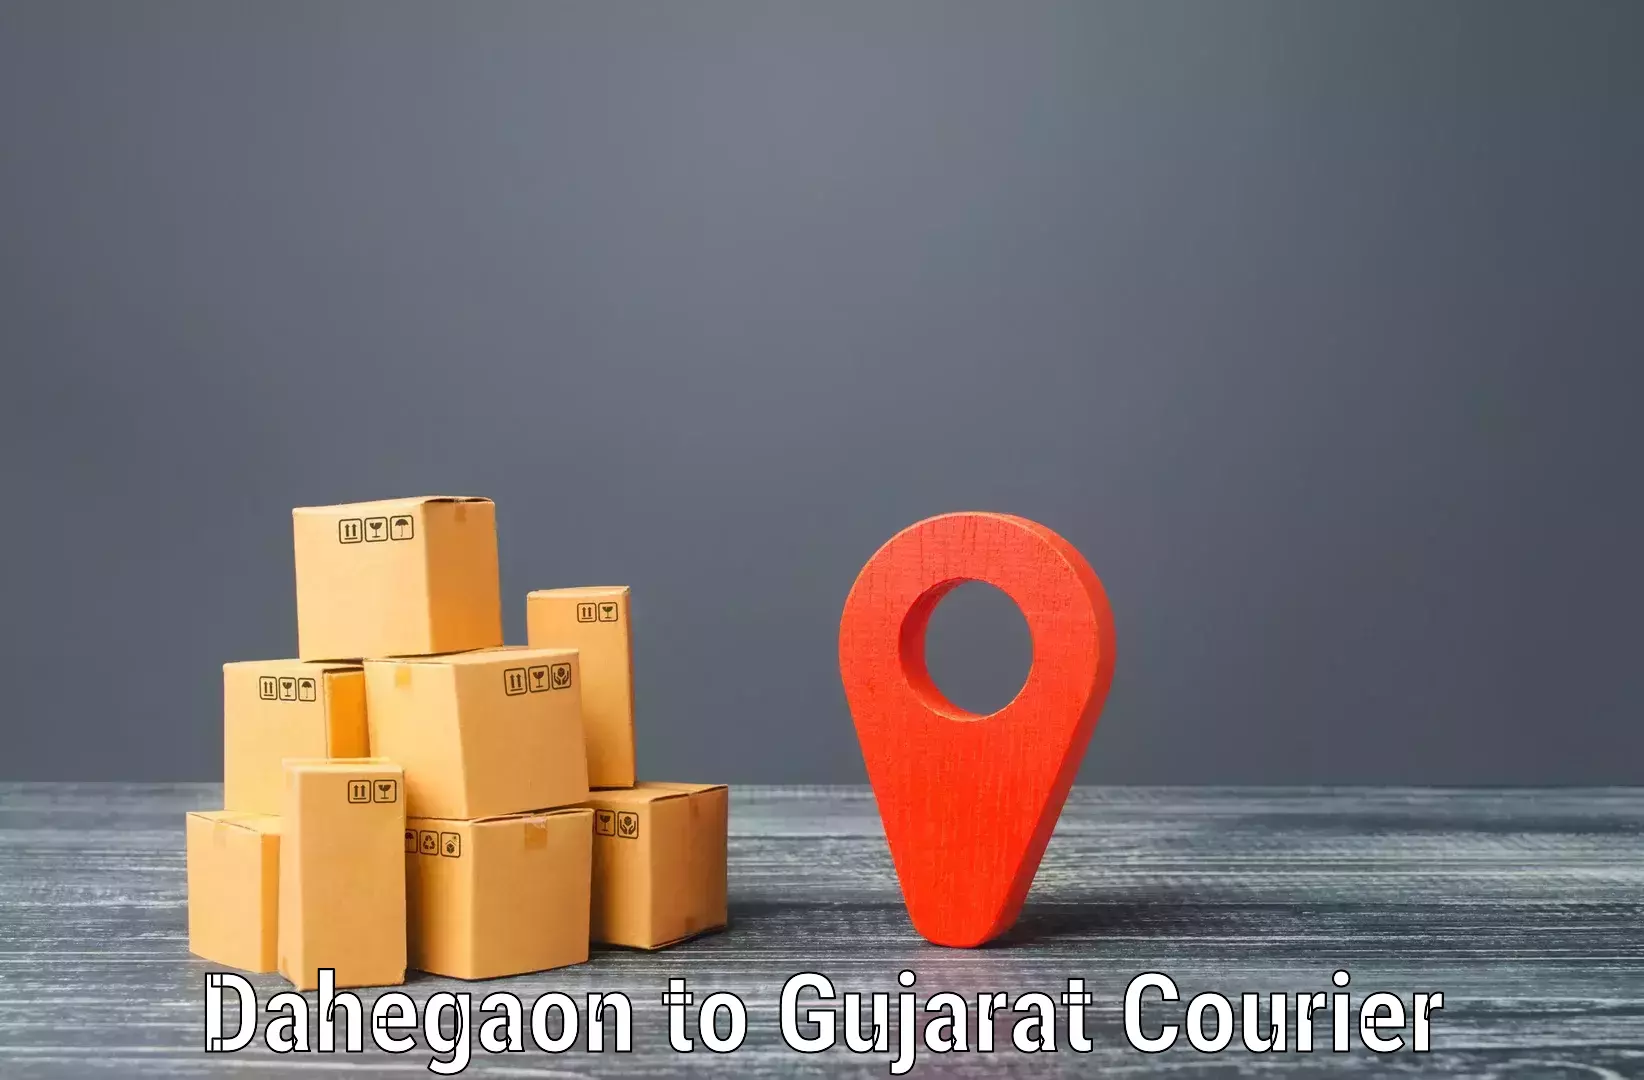 On-call courier service Dahegaon to Matar